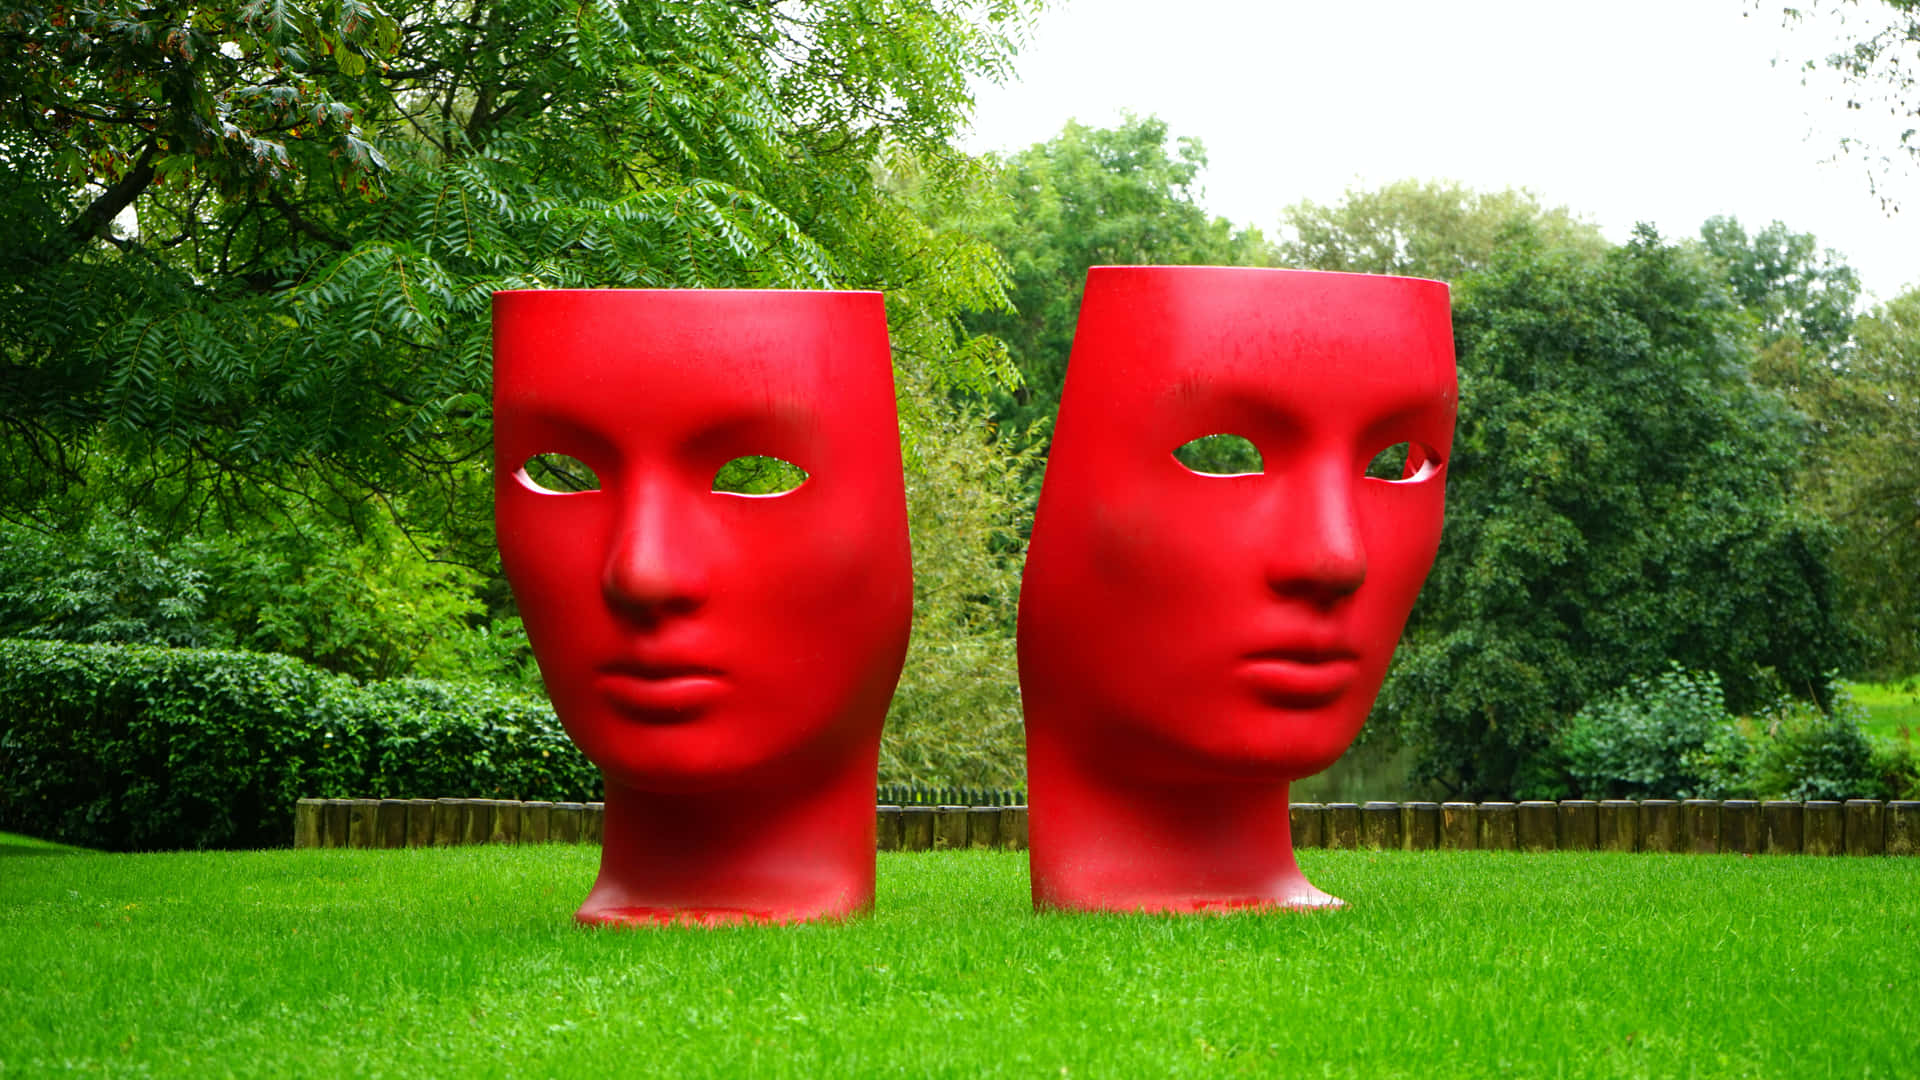 Two Red Sculptures In The Grass Wallpaper